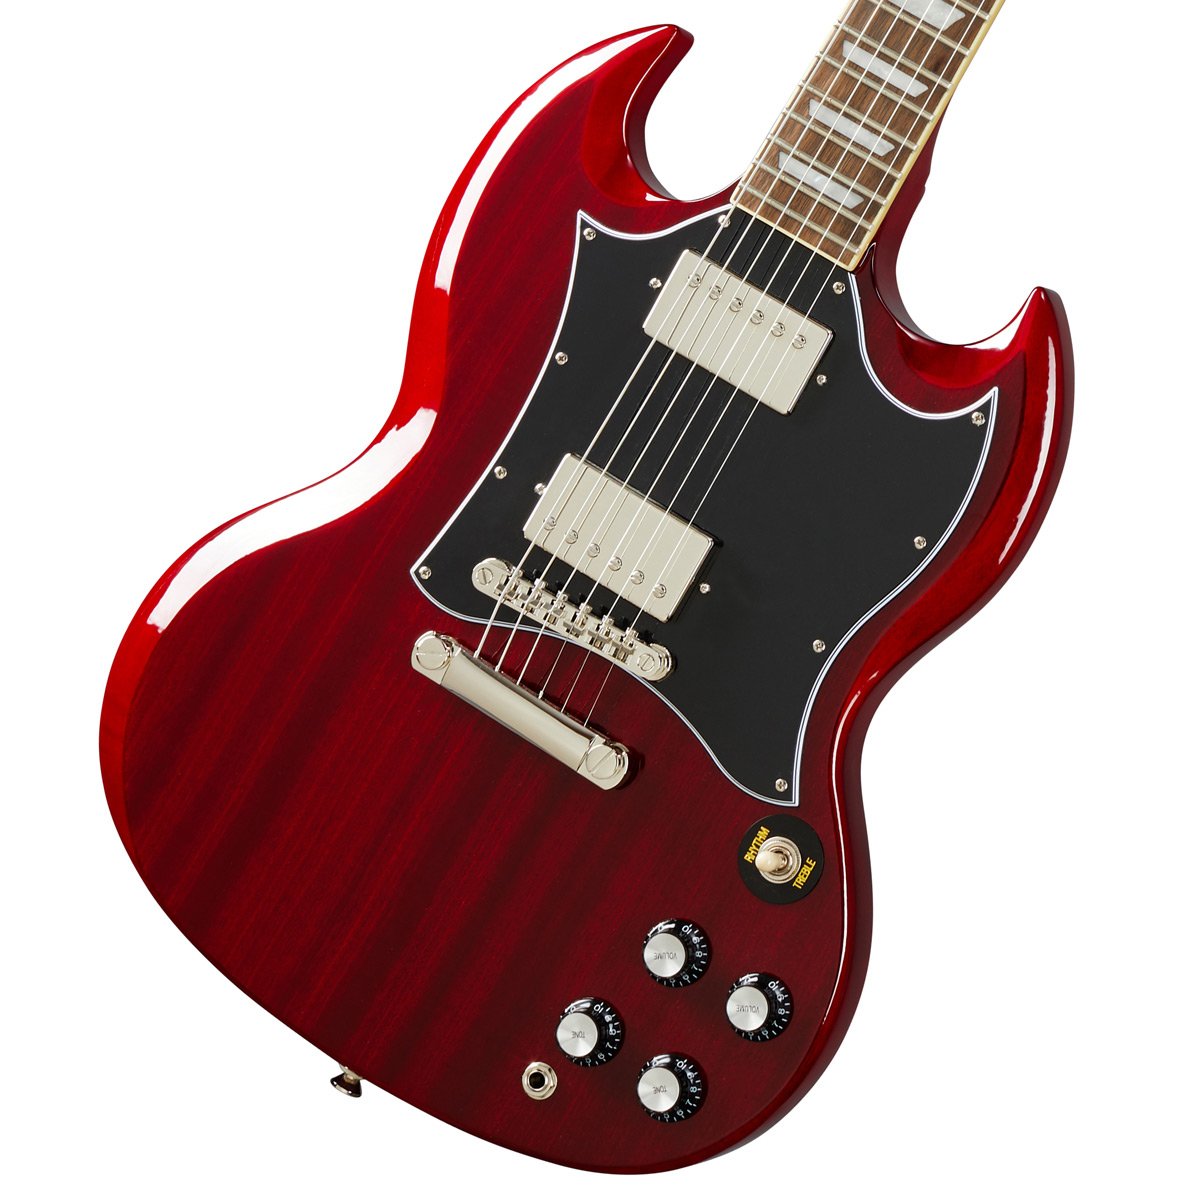 Epiphone / Inspired by Gibson SG Standard Heritage Cherry